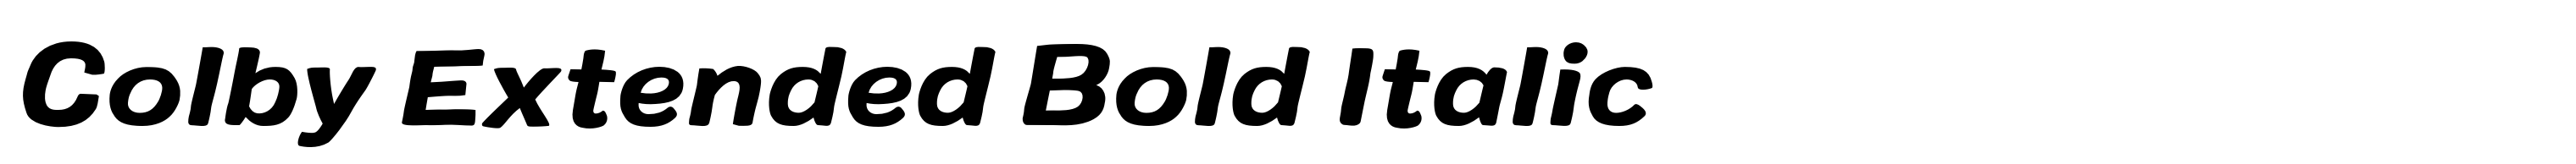 Colby Extended Bold Italic